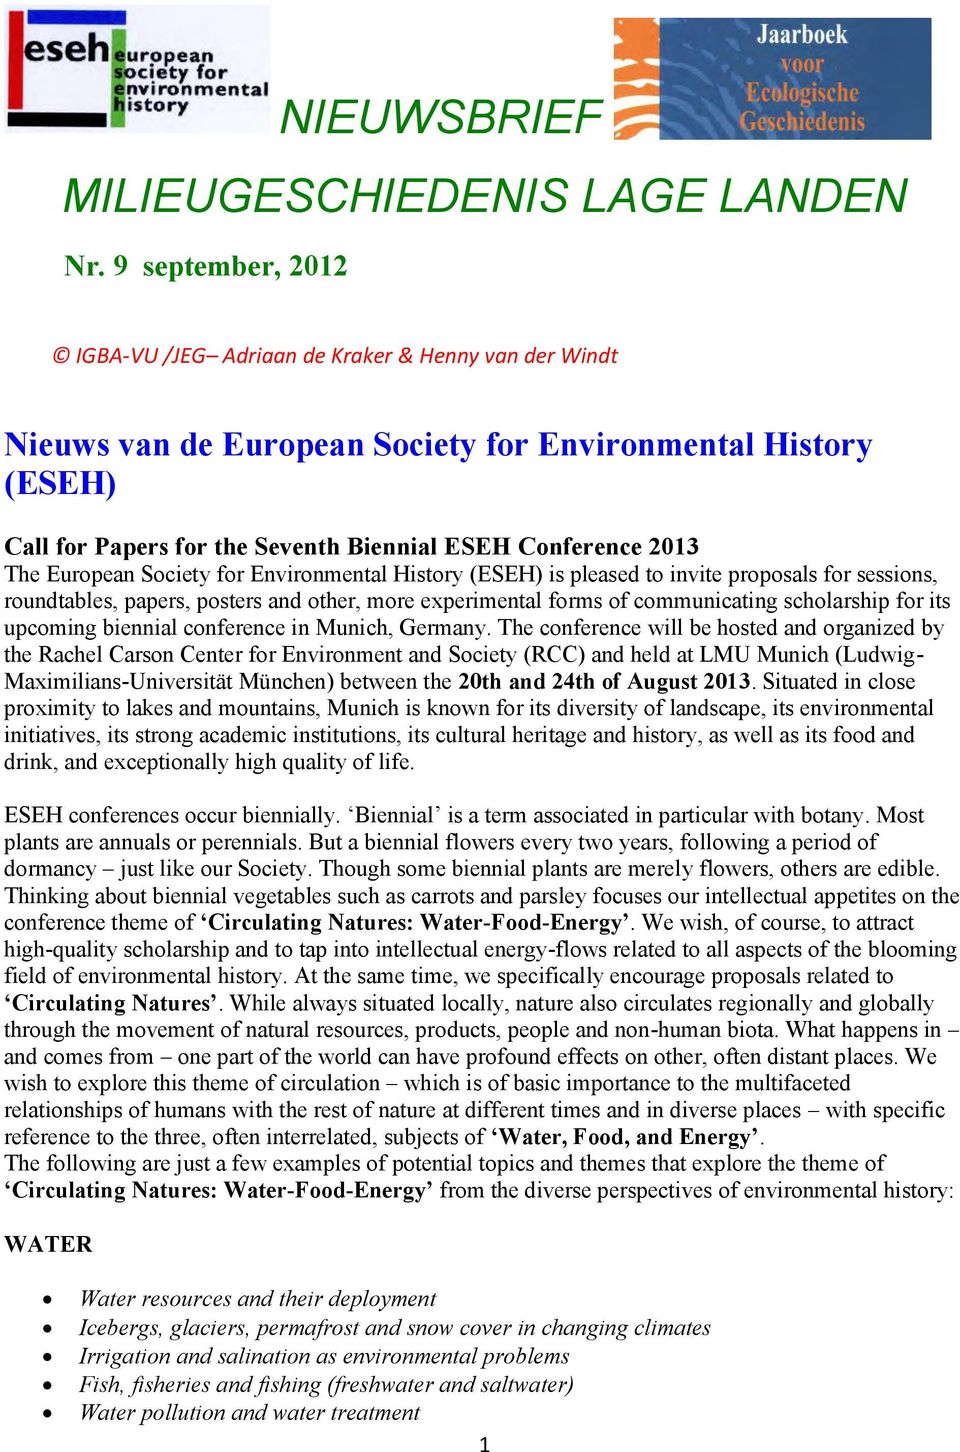 The European Society for Environmental History (ESEH) is pleased to invite proposals for sessions, roundtables, papers, posters and other, more experimental forms of communicating scholarship for its